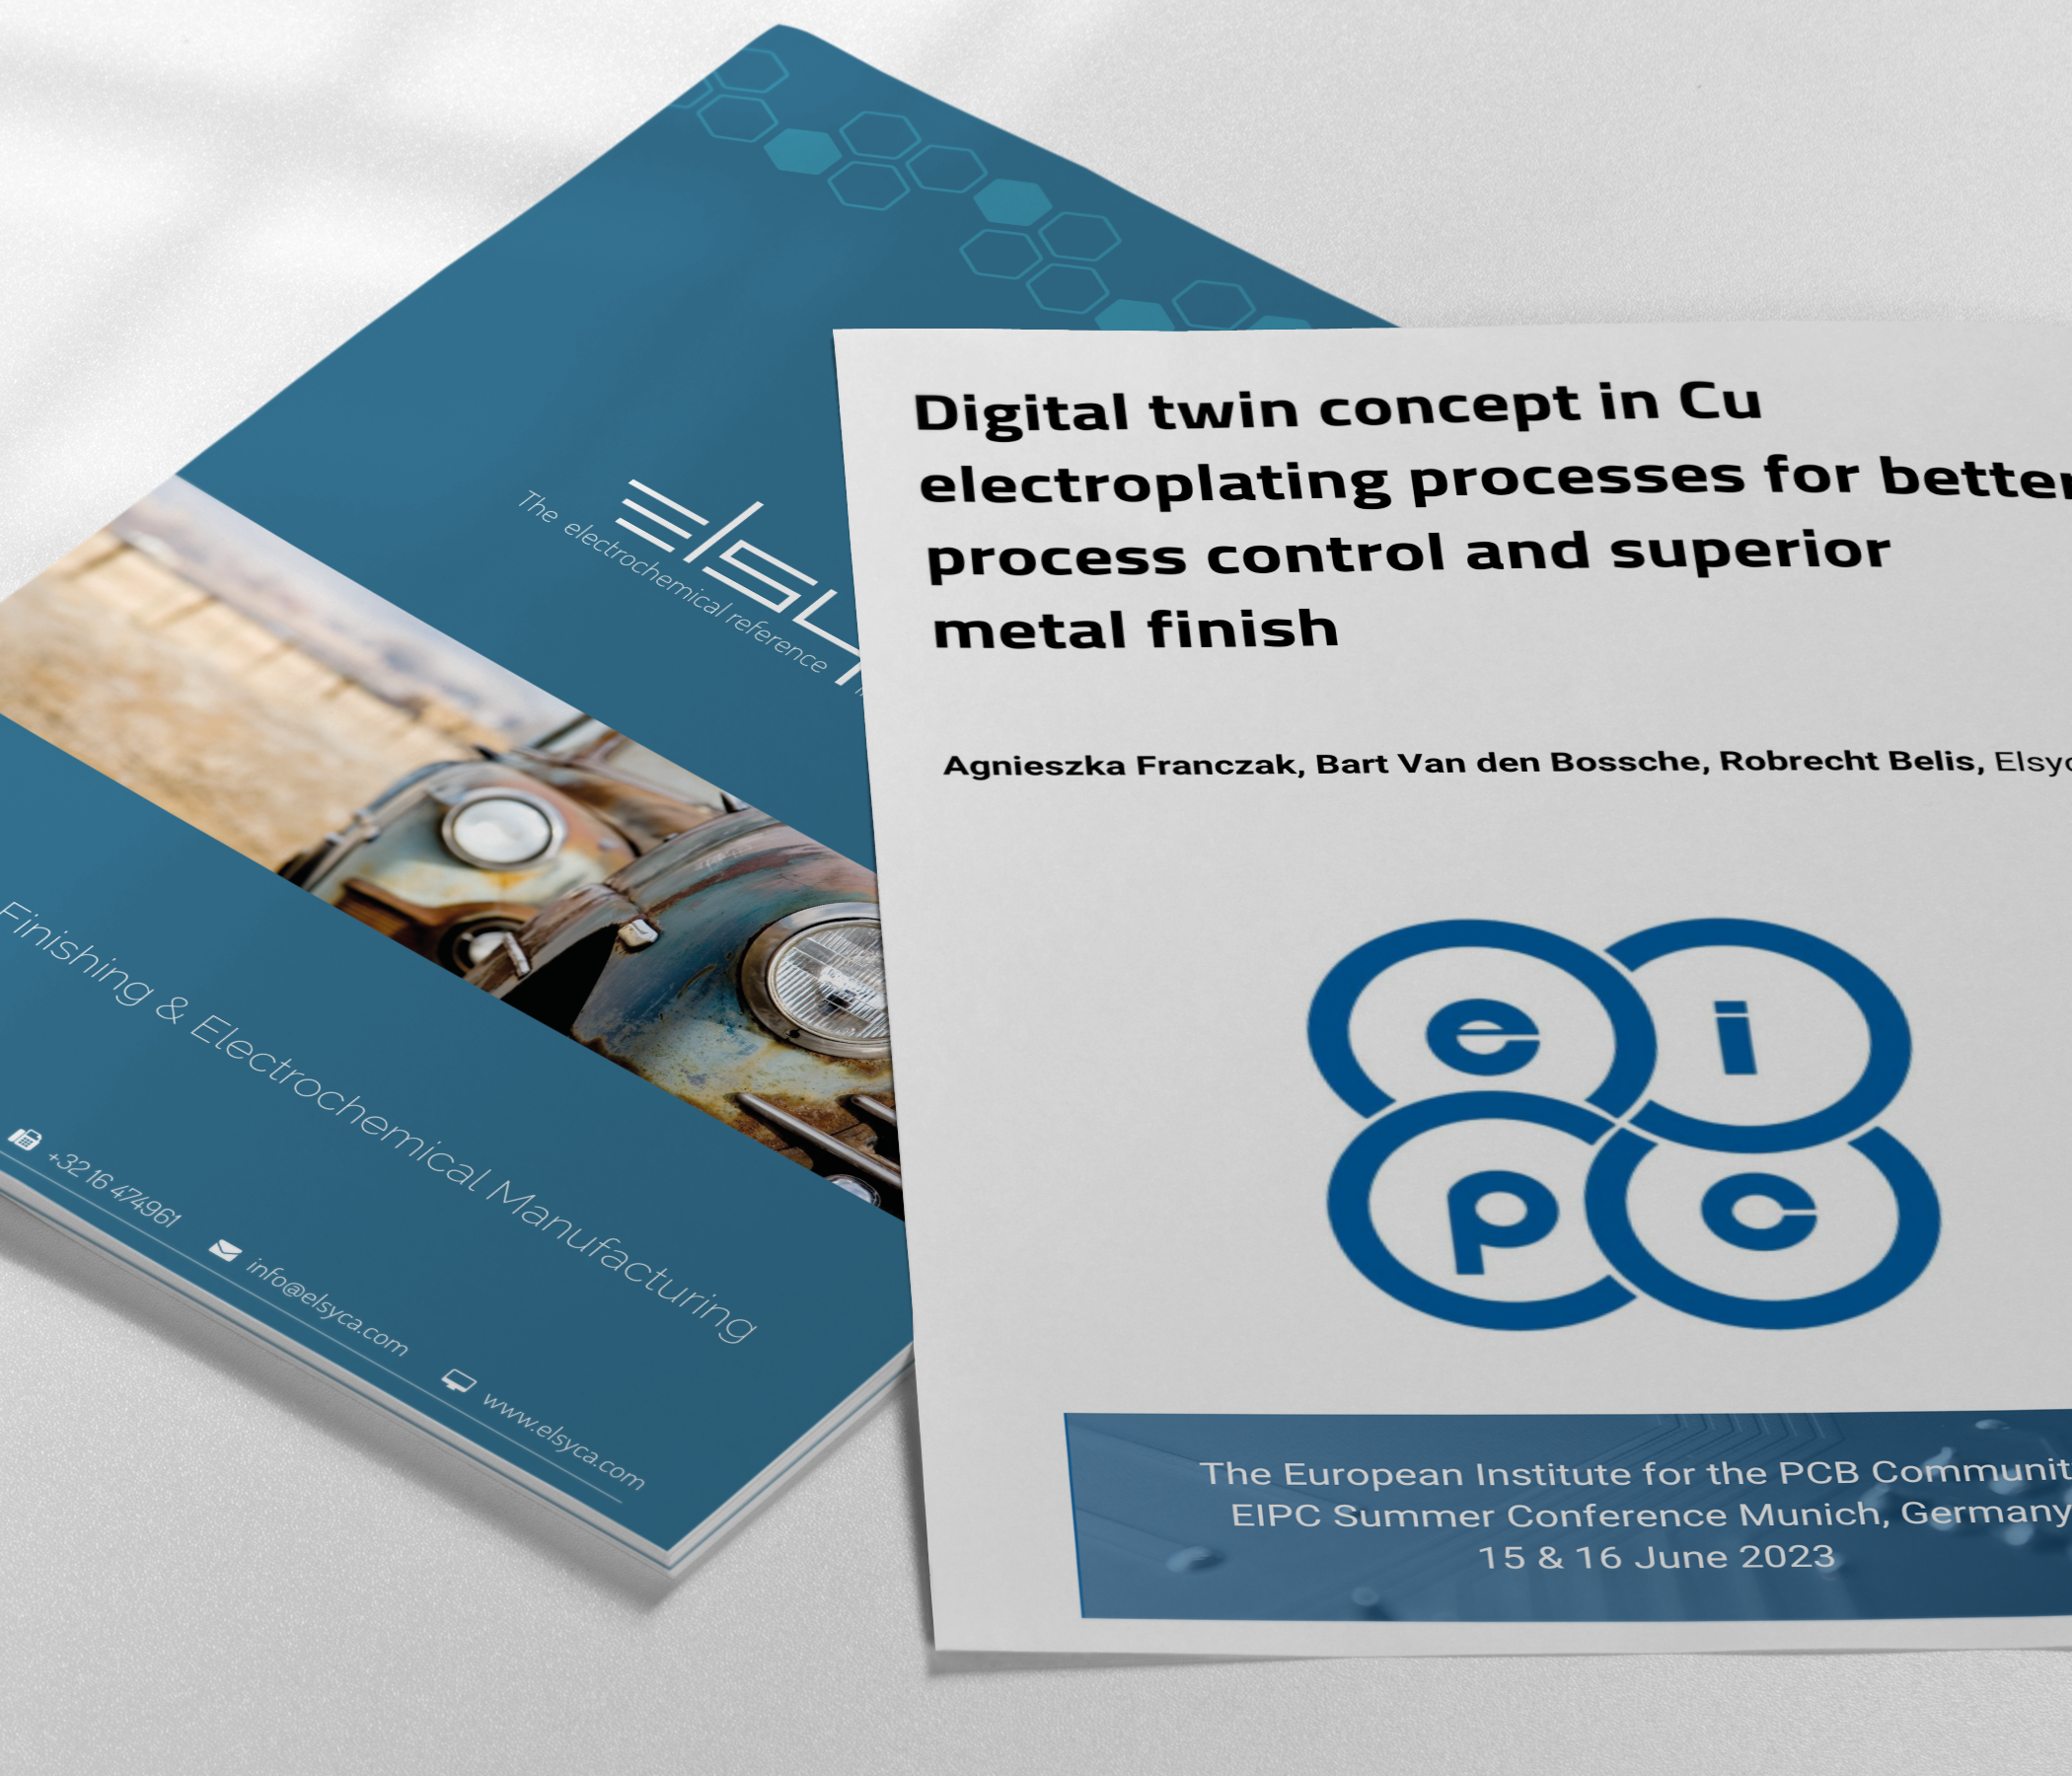 Digital twin concept in Cu electroplating processes for better process control and superior metal finish